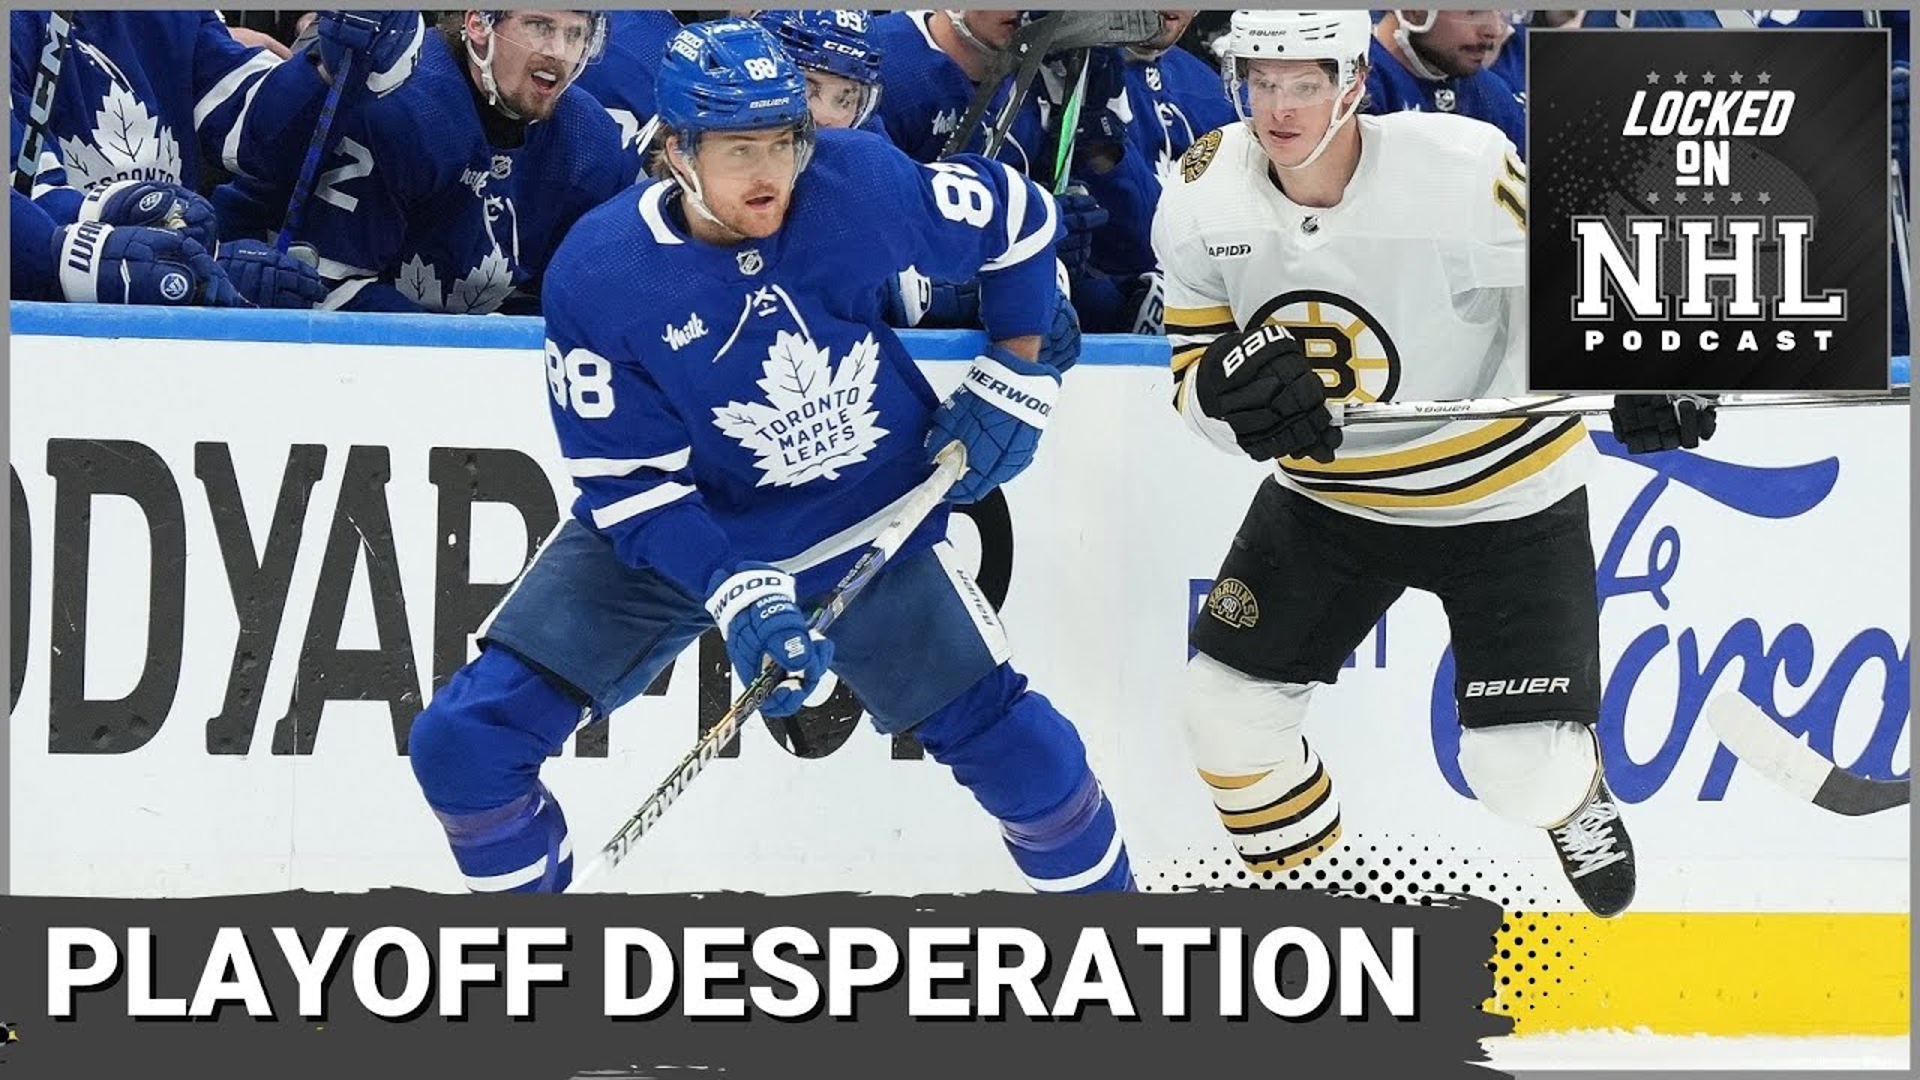 The Toronto Maple Leafs are down 3-1 in their Stanley Cup Playoff series with the Boston Bruins. The Leafs are struggling on the ice and bickering off it.